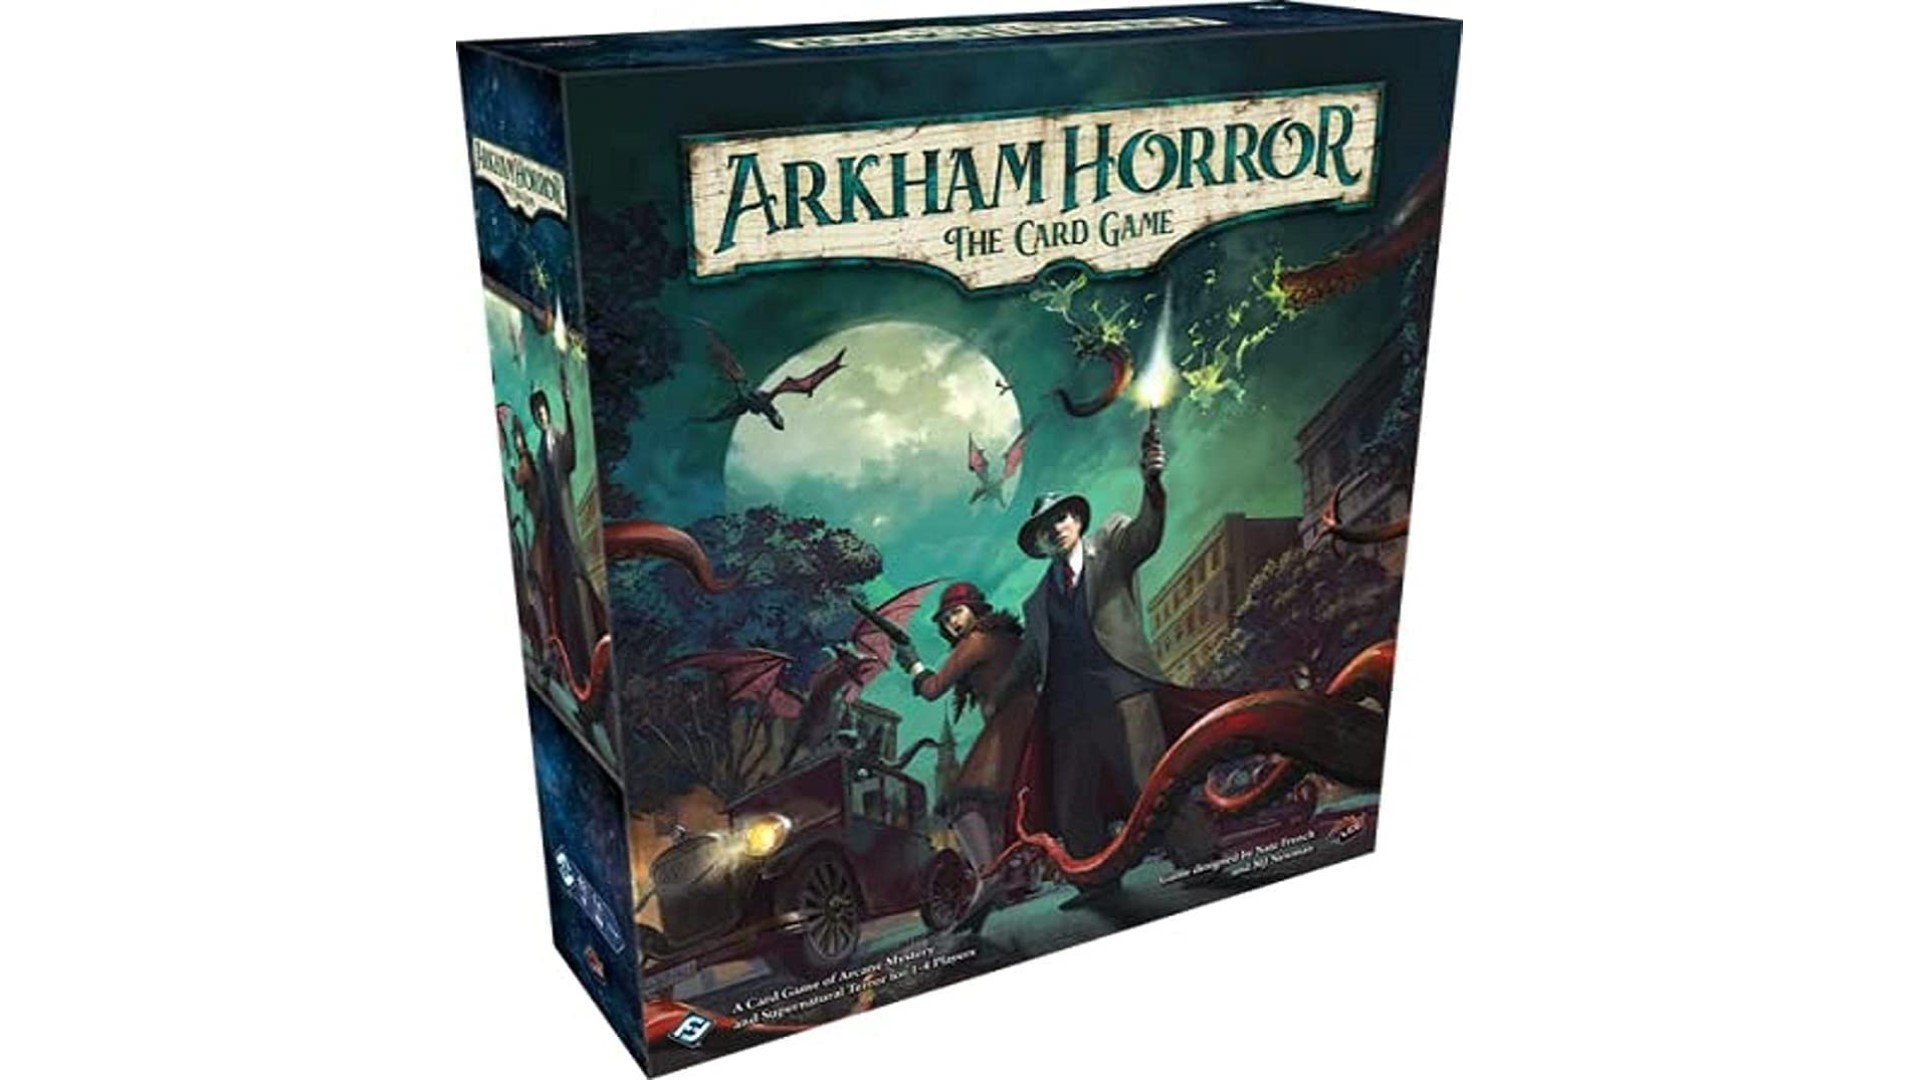 RPG board games the box of the arkham horror card game